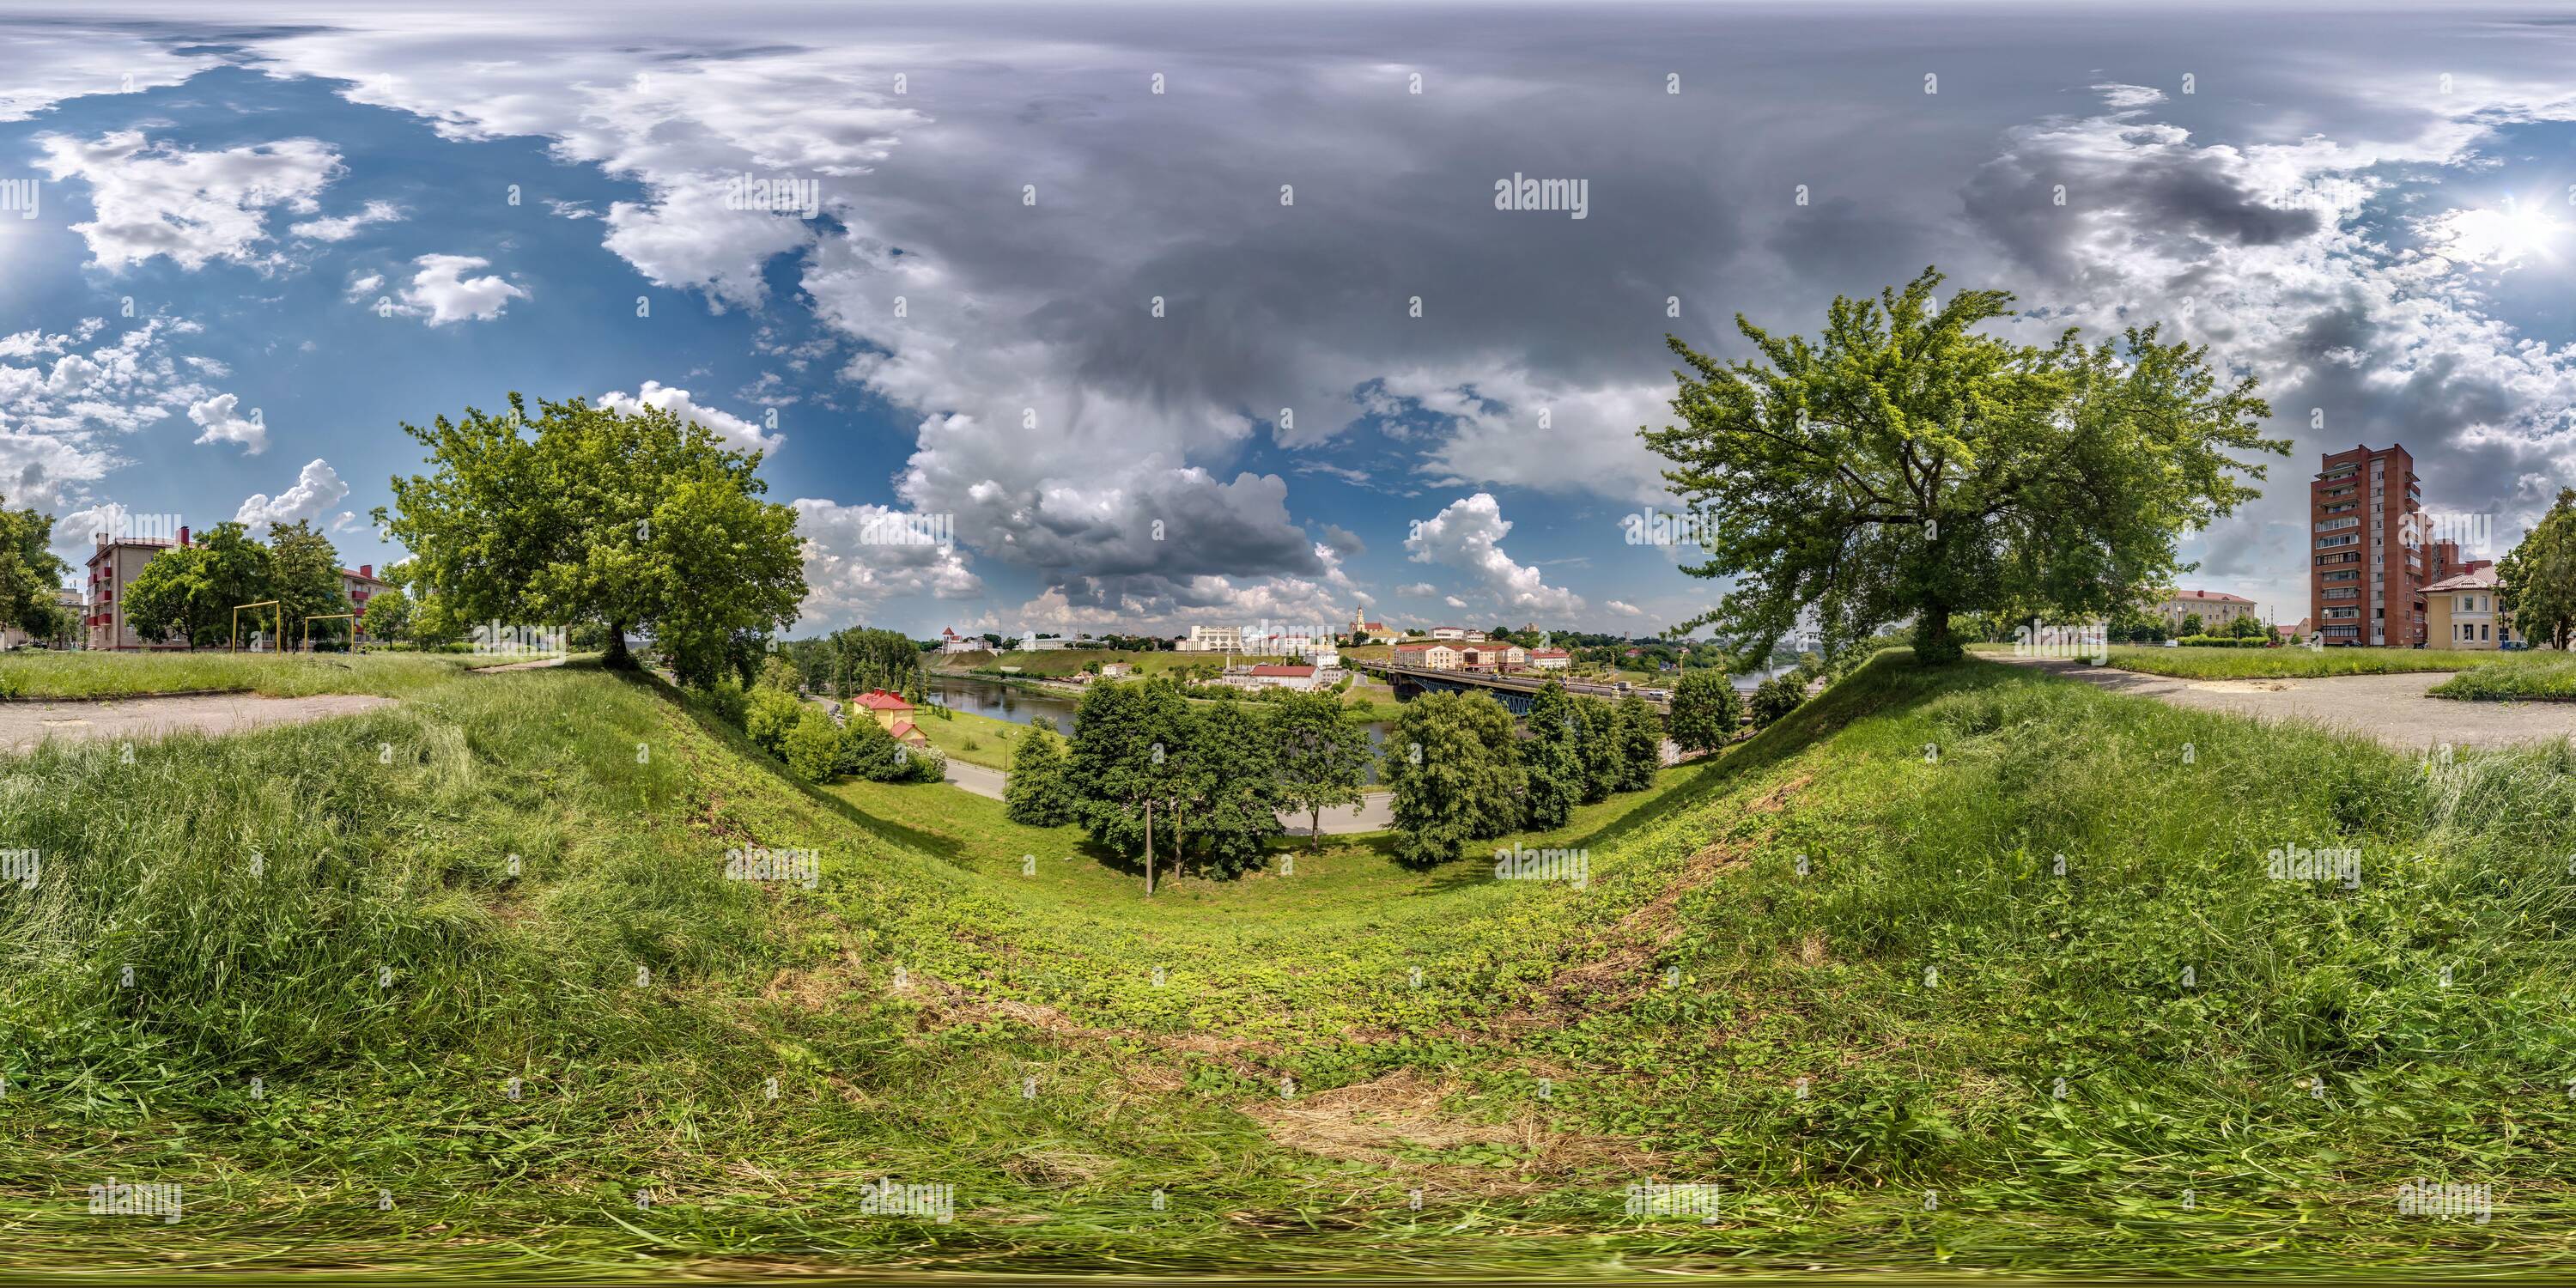 360 degree panoramic view of full seamless spherical hdri panorama 360 promenade overlooking the old city and historic buildings of medieval castle near wide river on mountain in